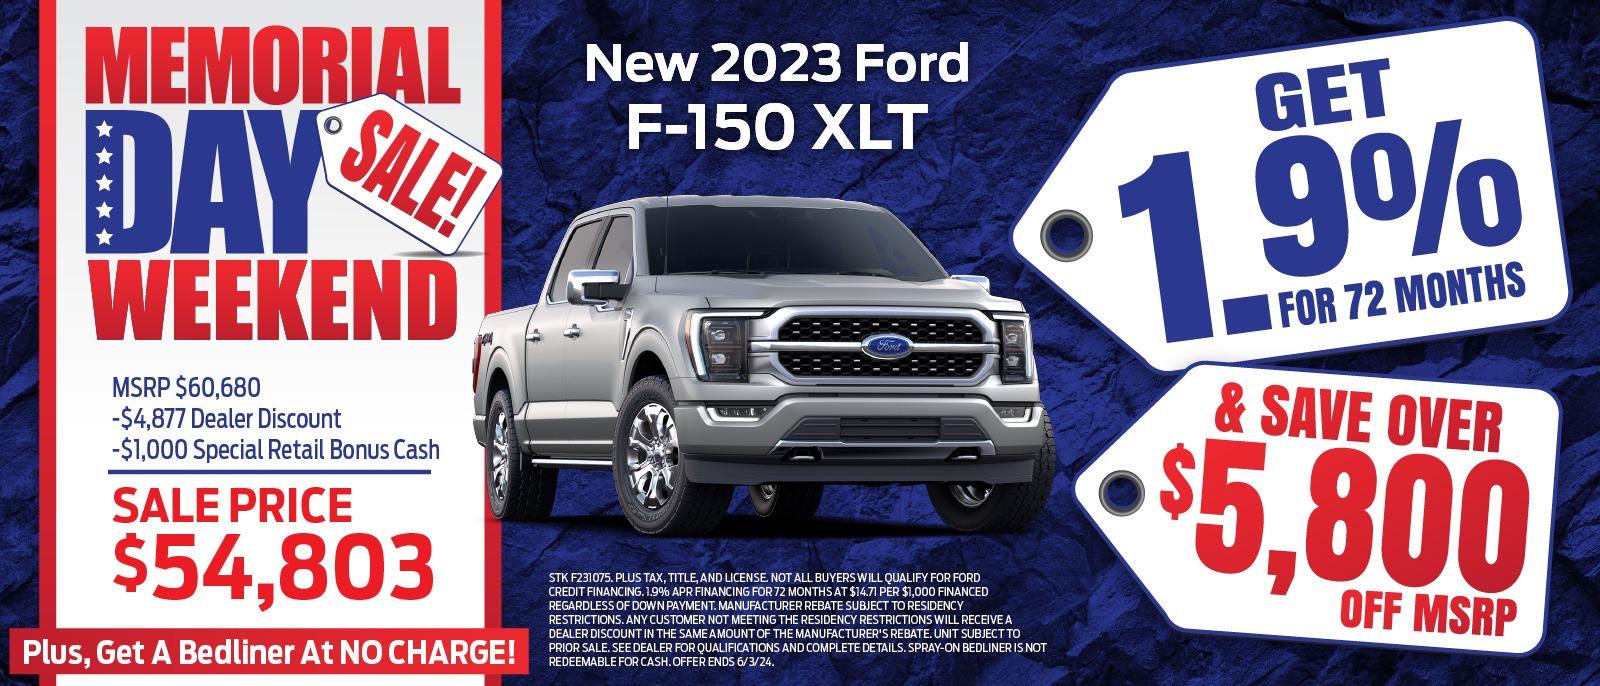 ⭐Memorial Day Weekend 2023 F-150 Special!🙏